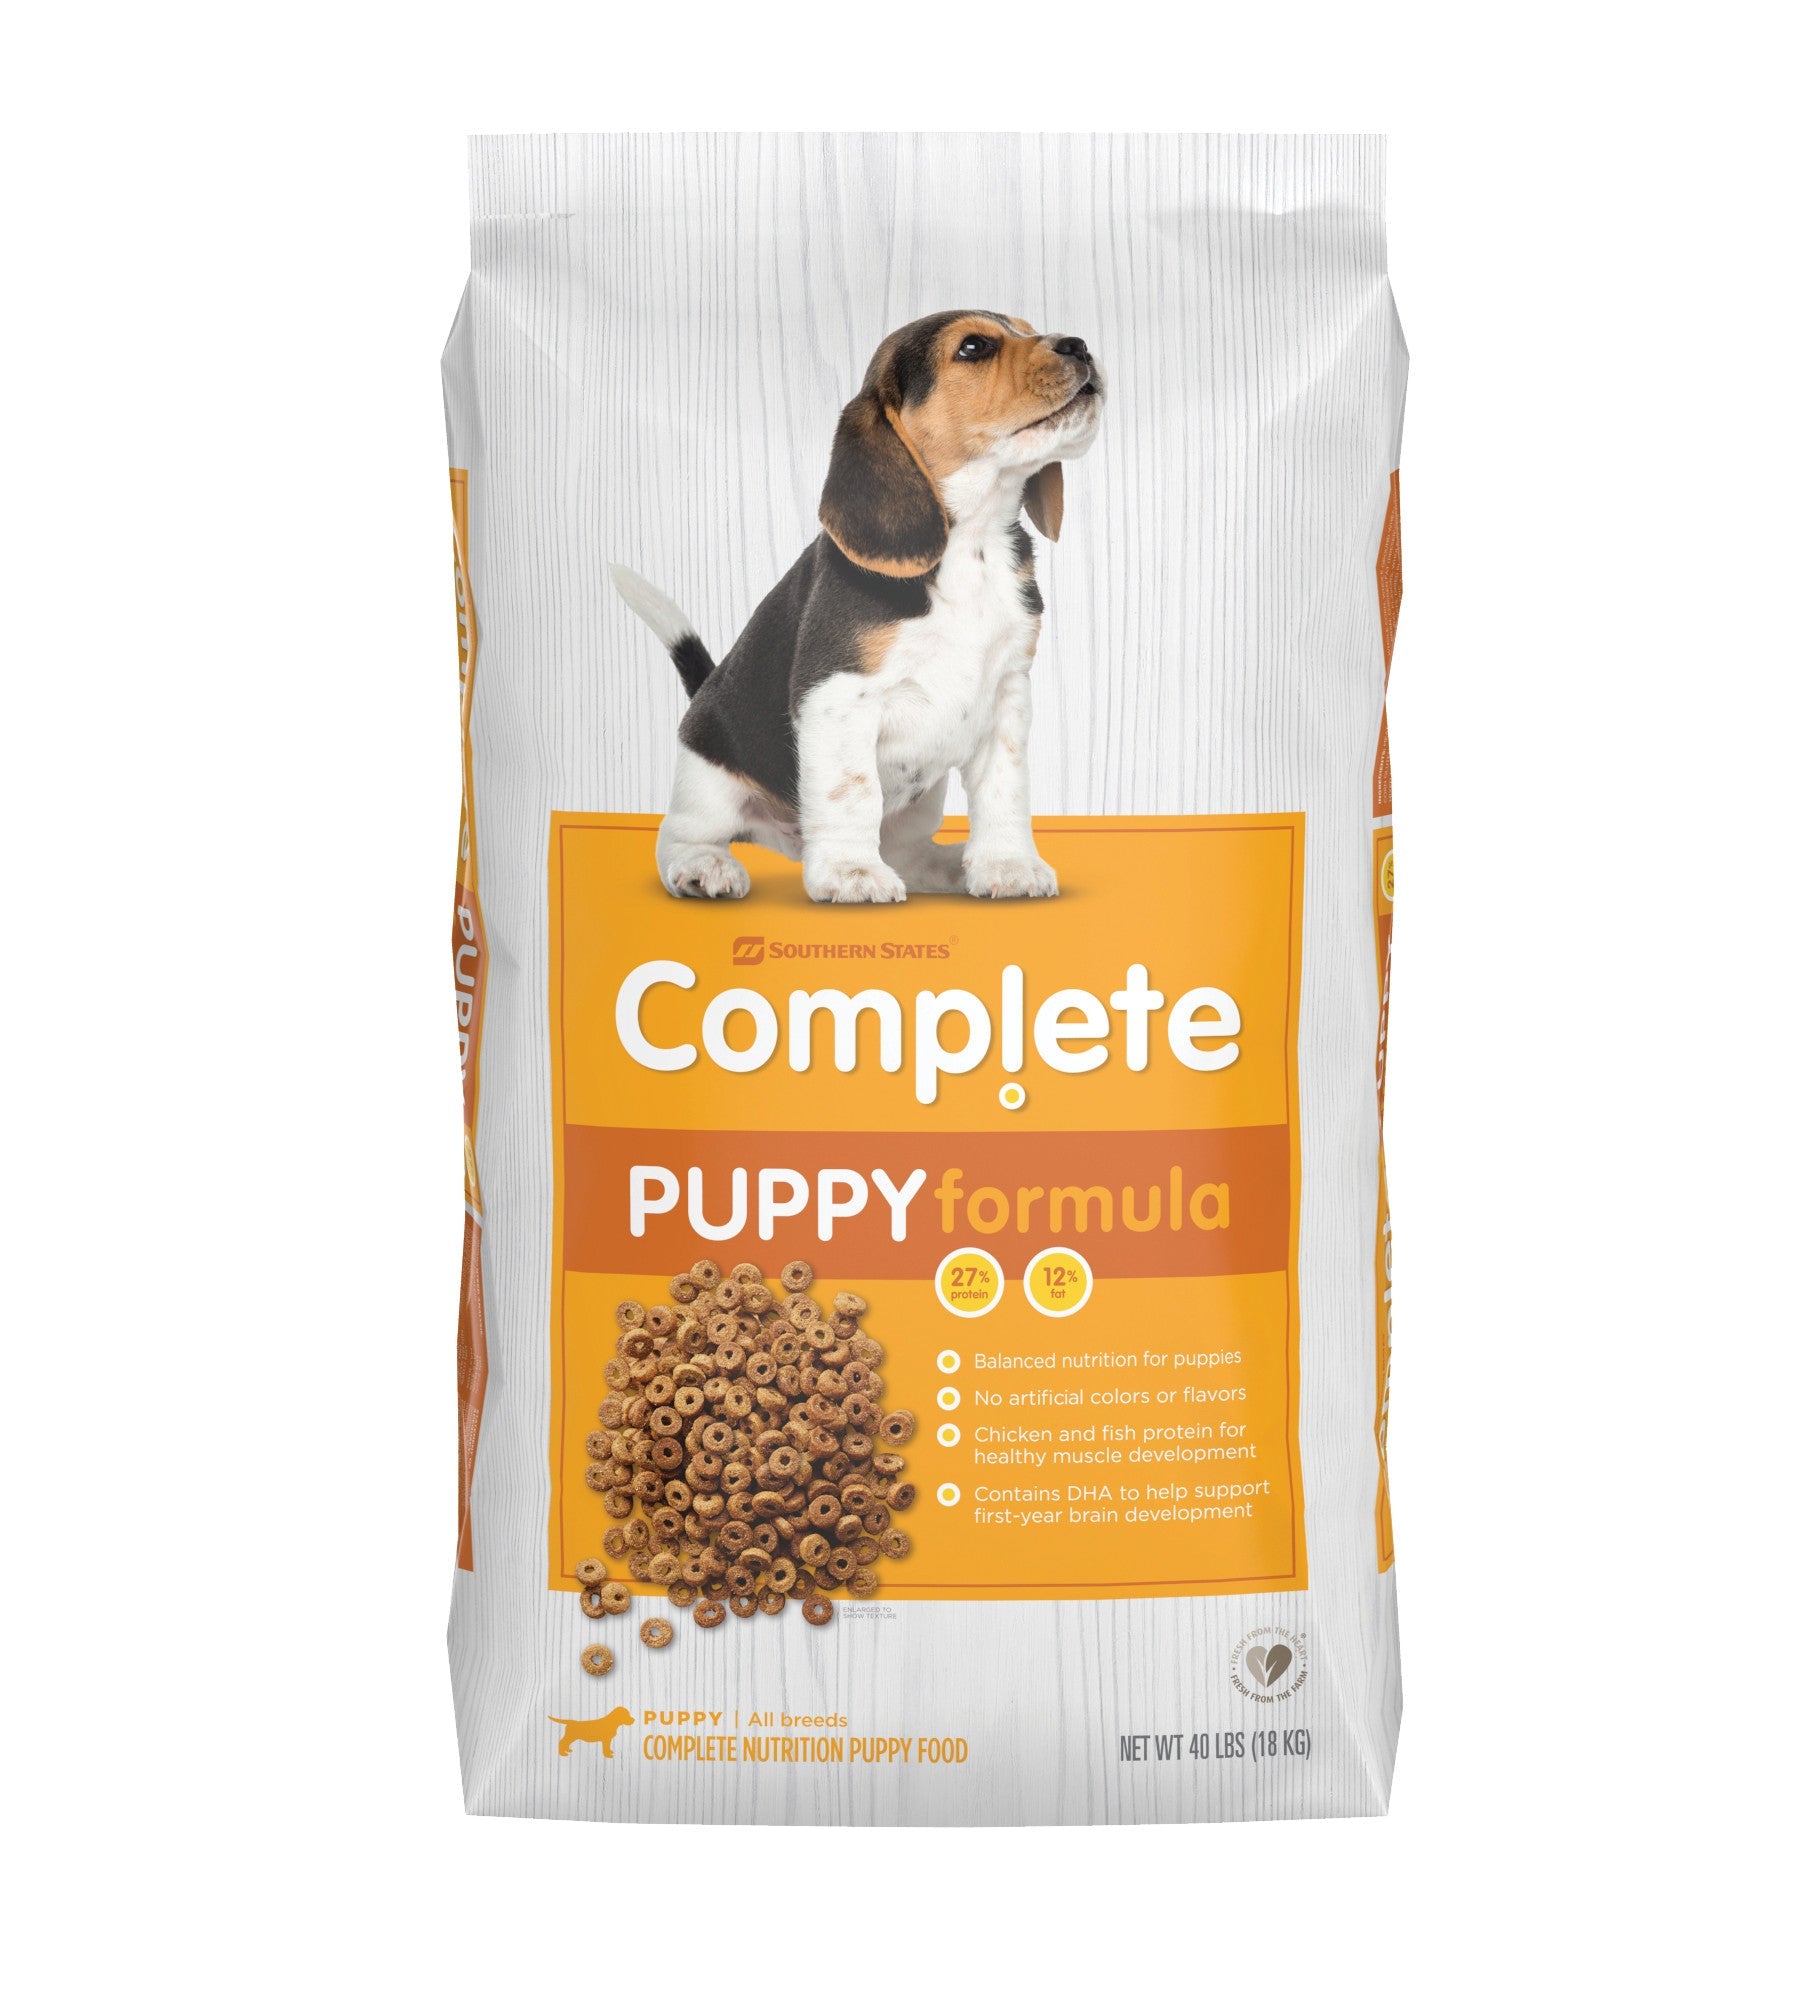 Southern States, Southern States Complete Puppy Formula